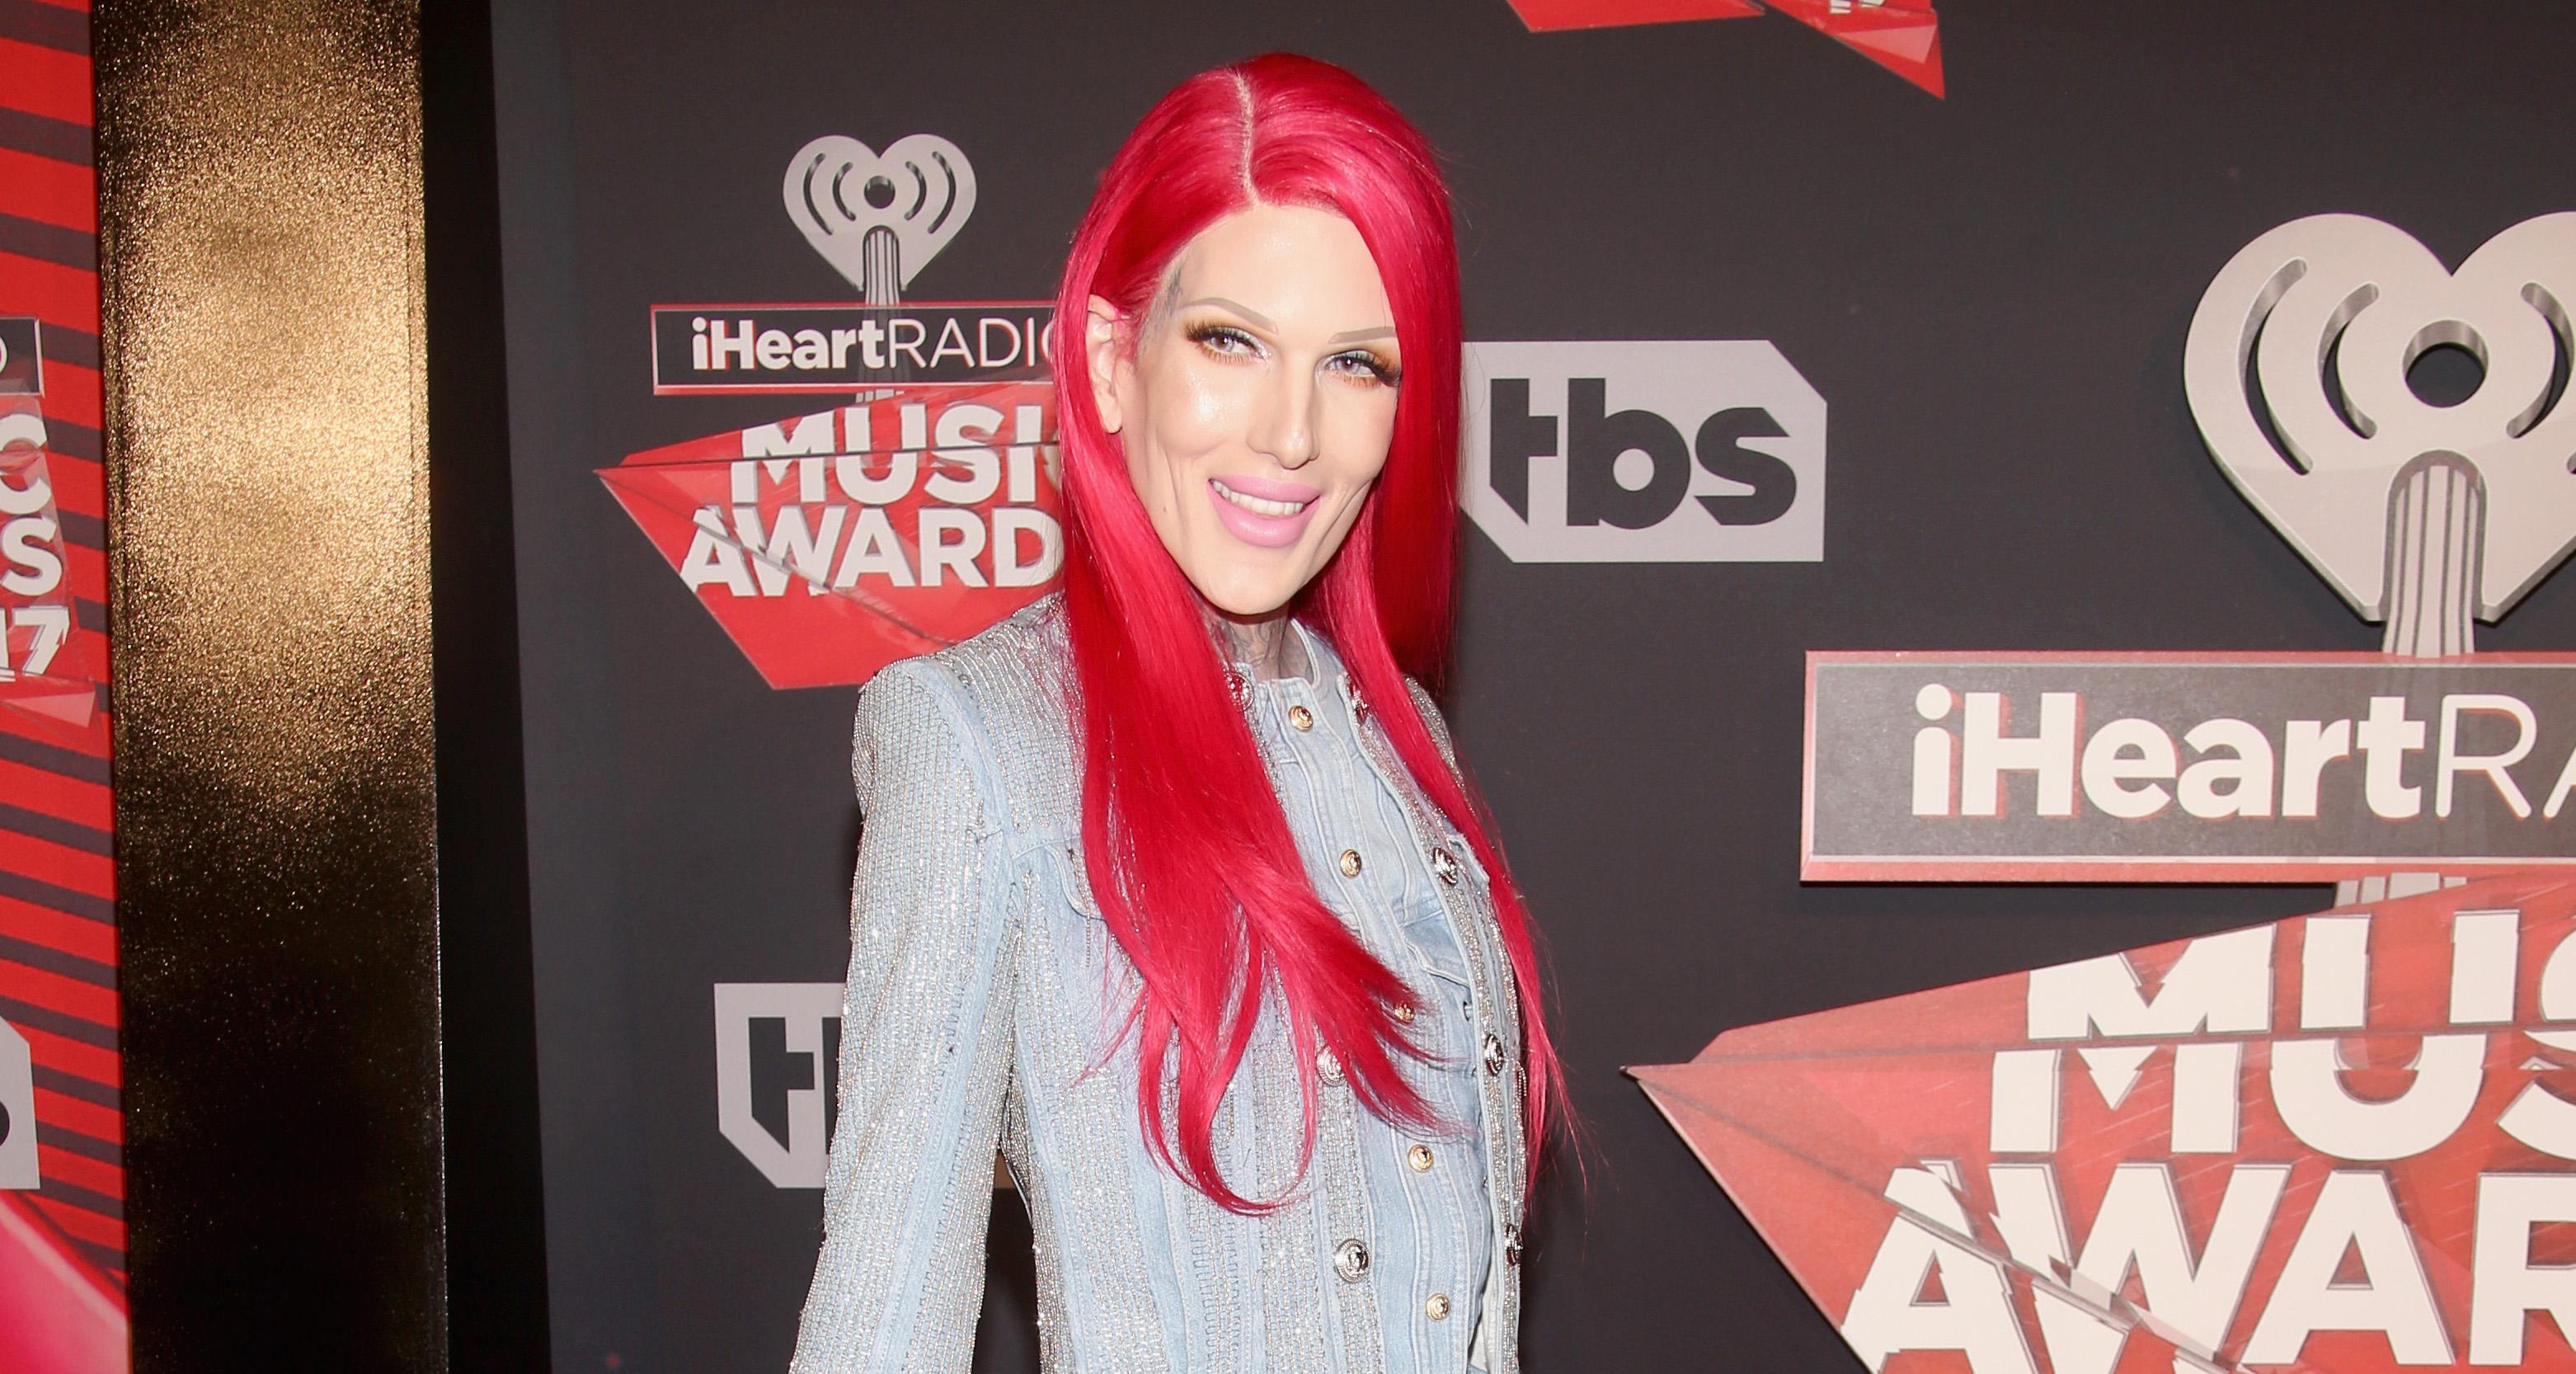 iHeartRadio Music Awards - Red Carpet Arrivals